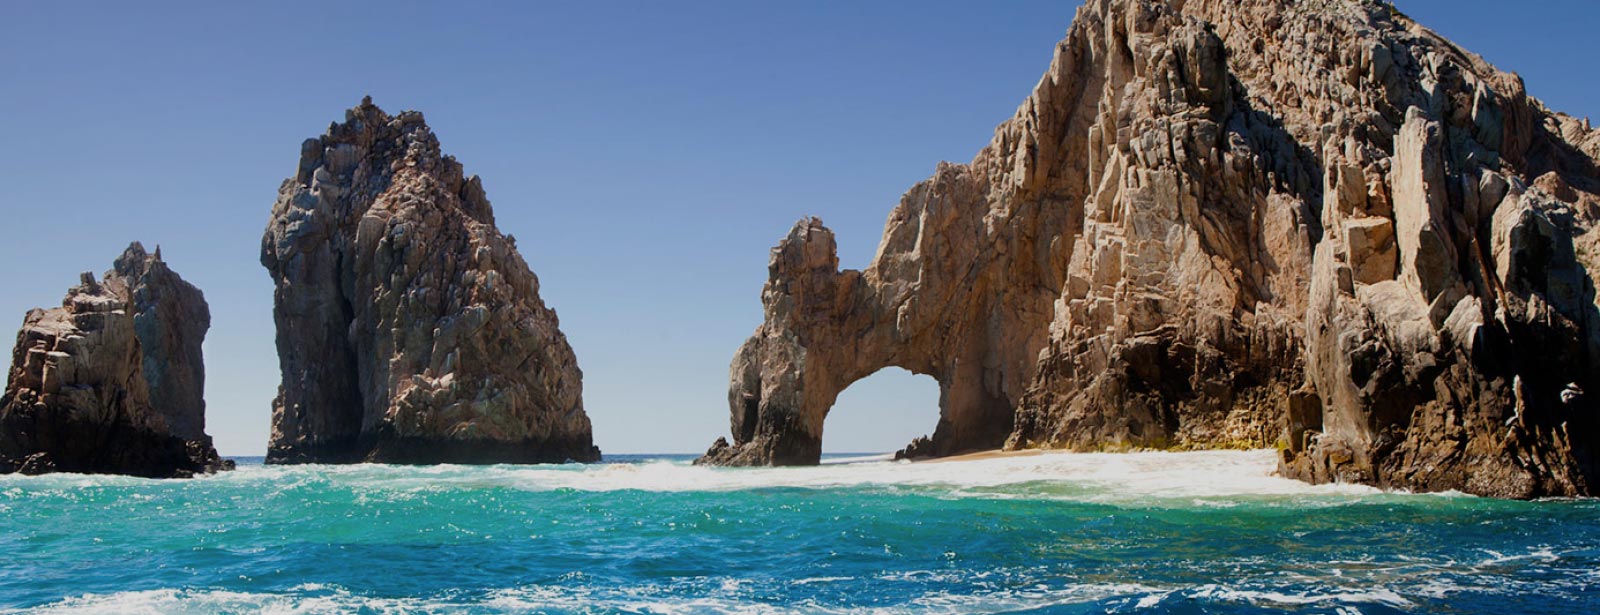 Welcome to Cabo san Lucas